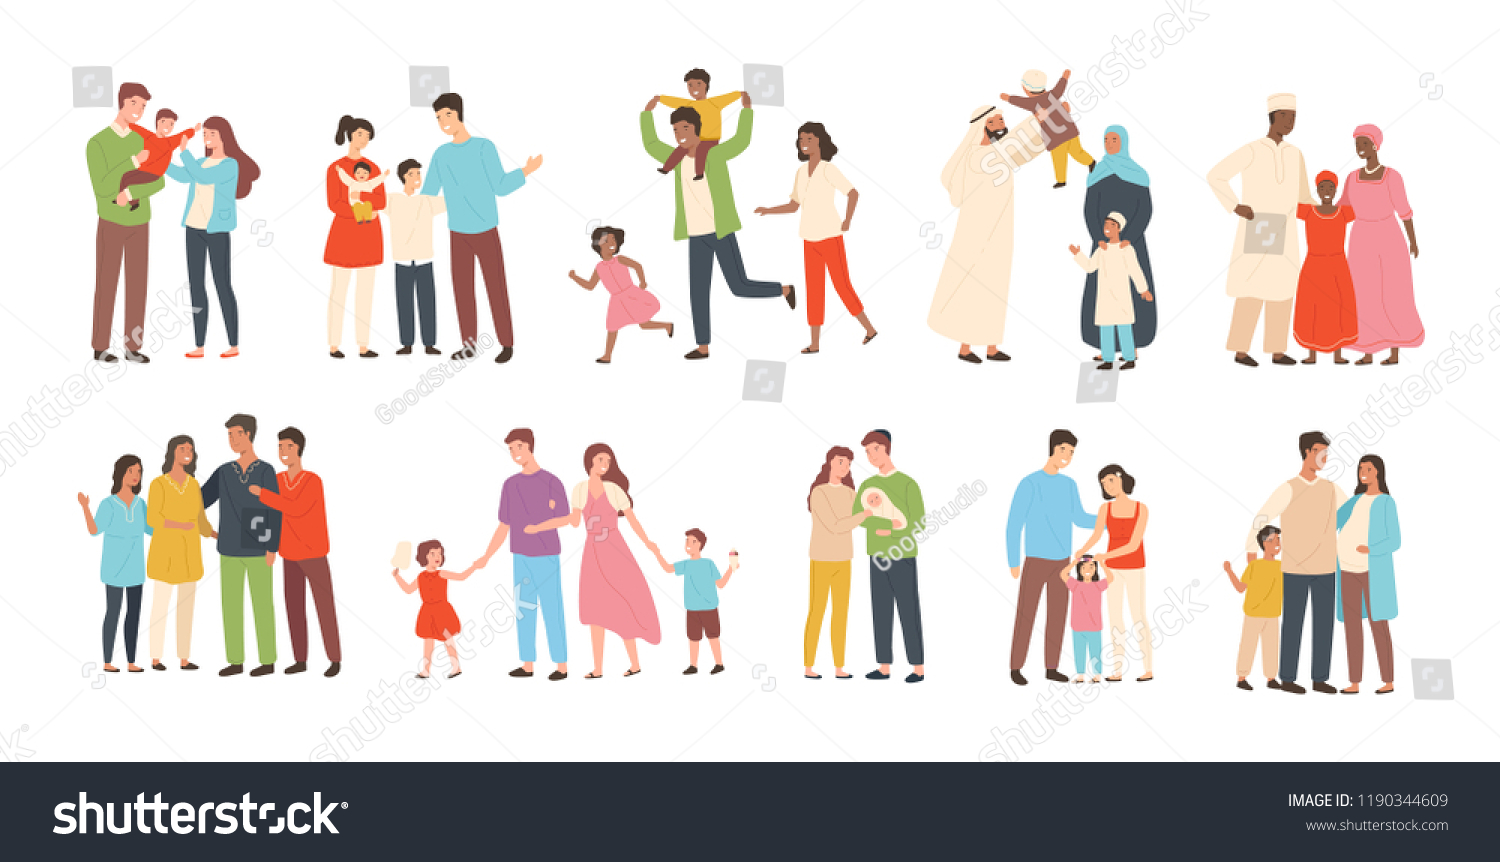 Set of happy traditional heterosexual families with children. Smiling mother, father and kids. Cute cartoon characters isolated on white background. Colorful vector illustration in flat style. #1190344609